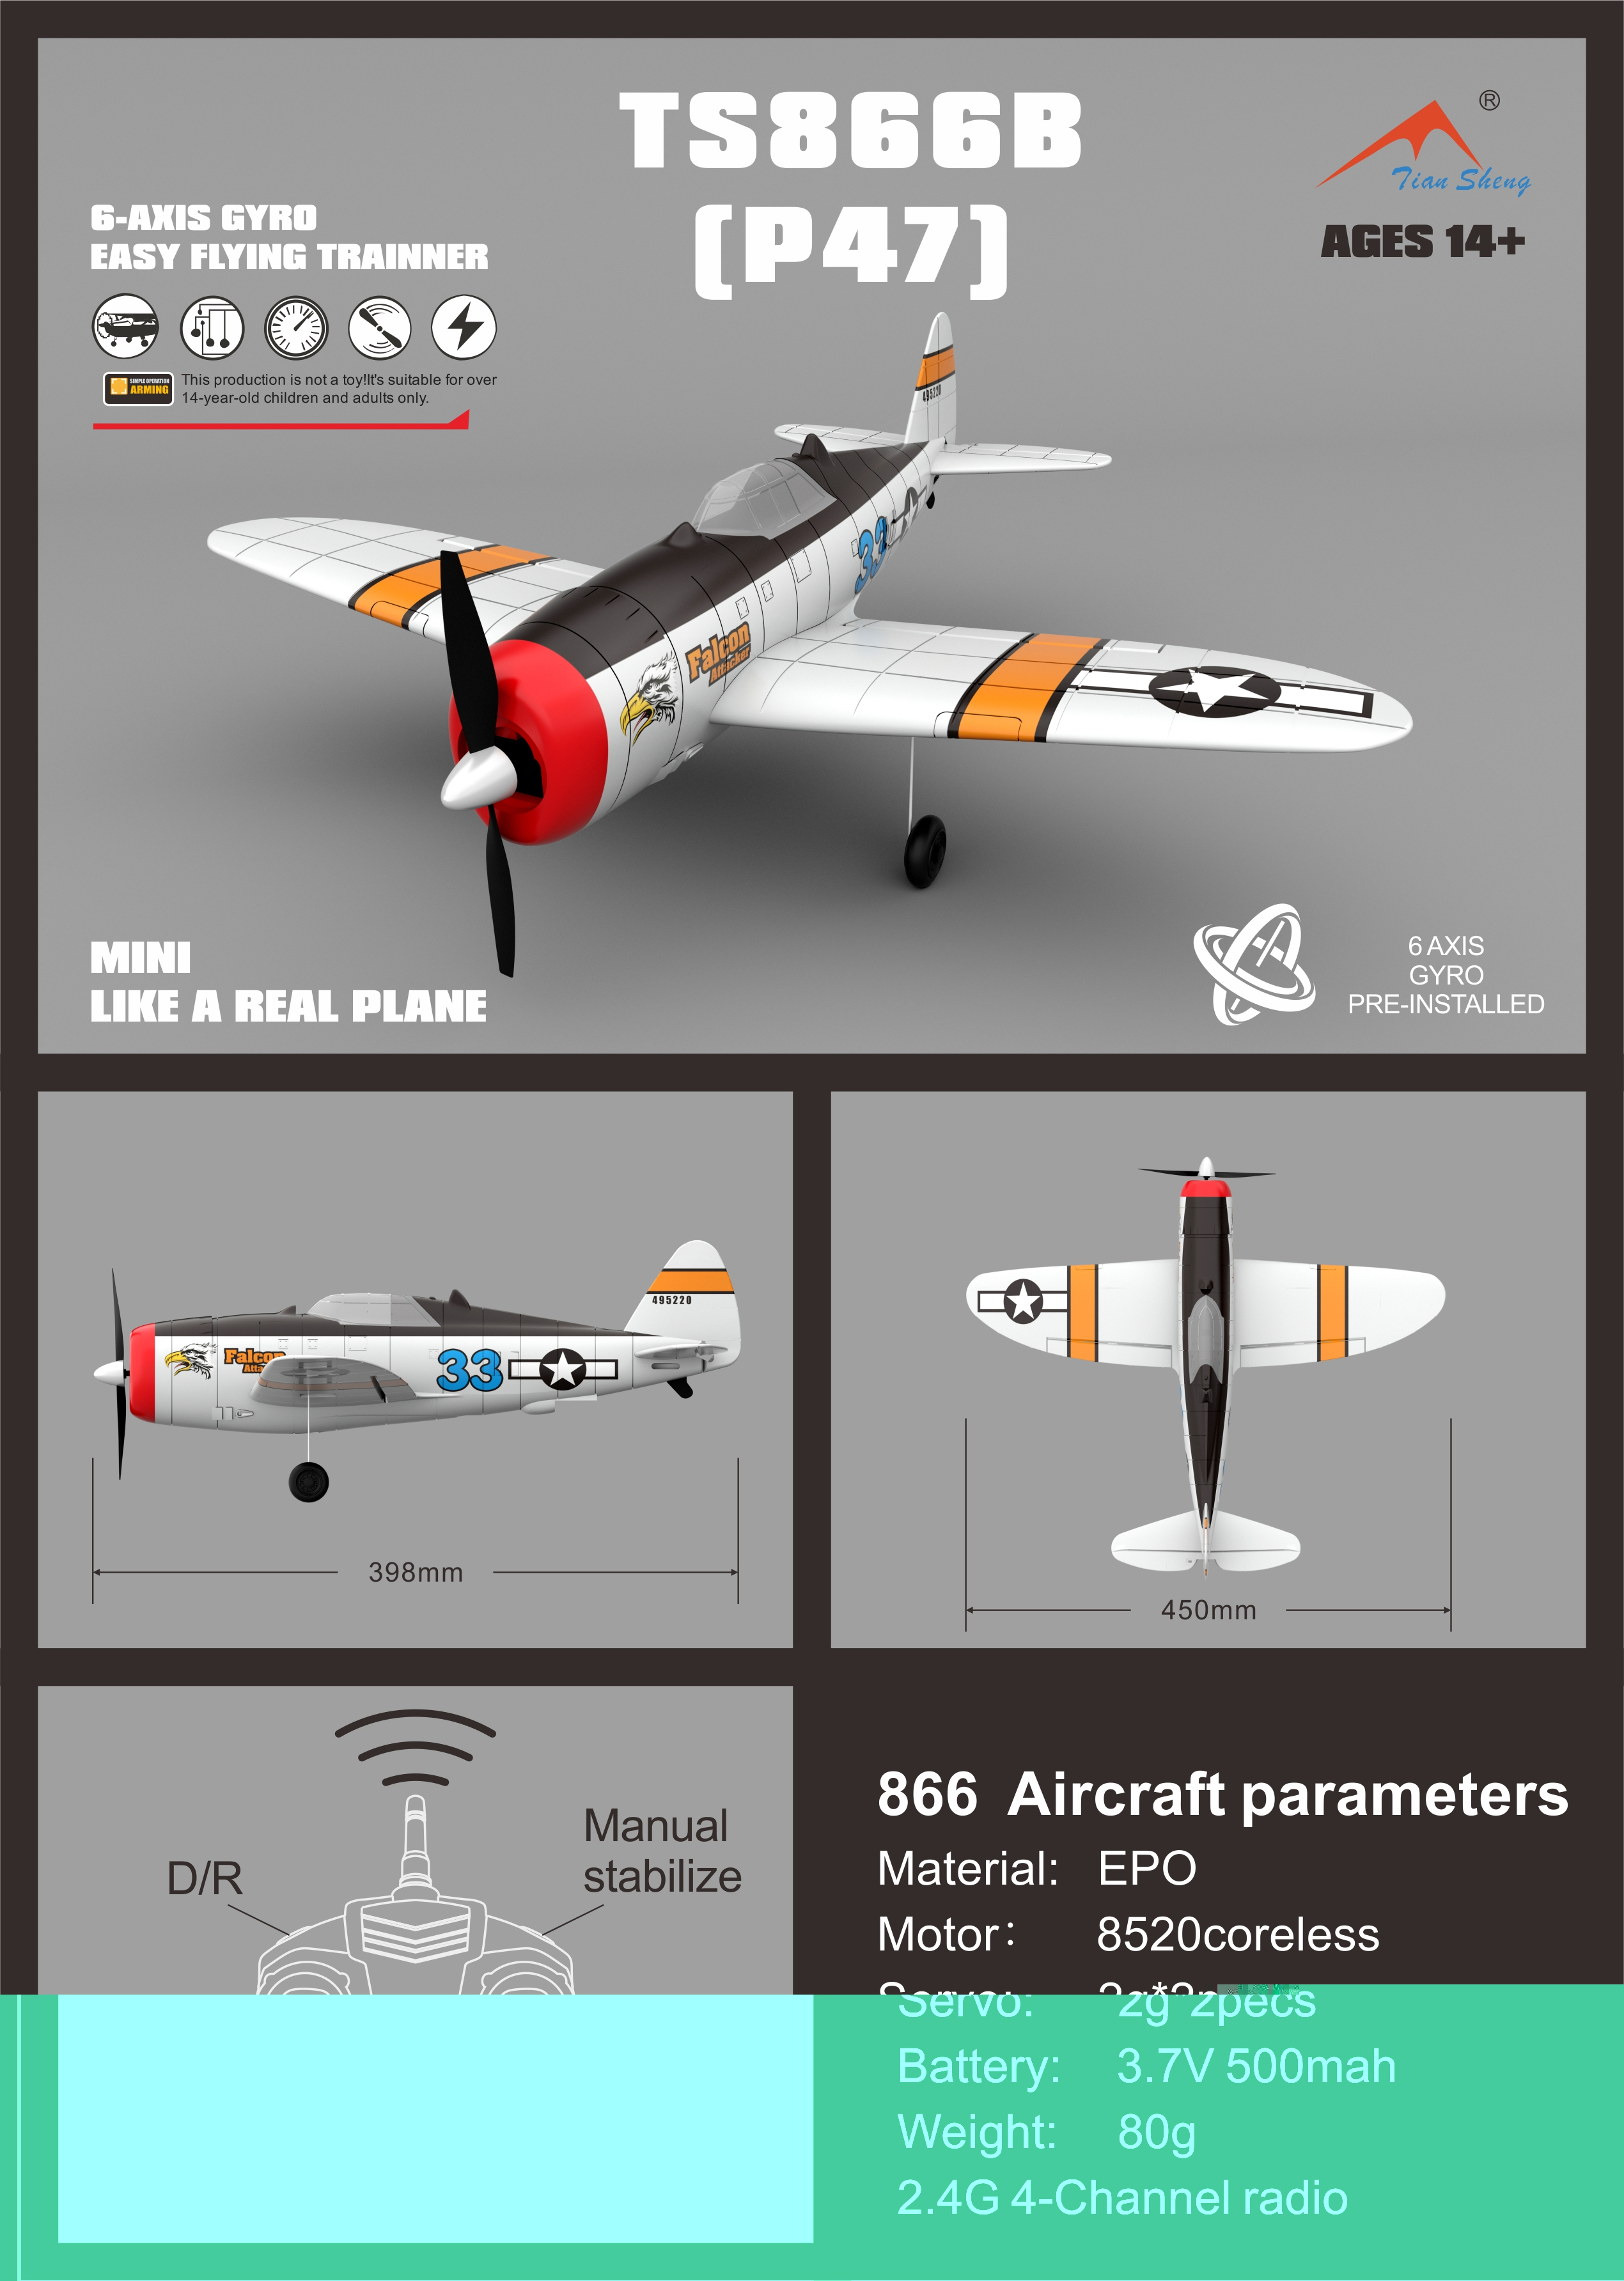 World War II United States Army Air Forces (USAAF) P-47 Thunderbolt Fighters Mini RC Aircraft.